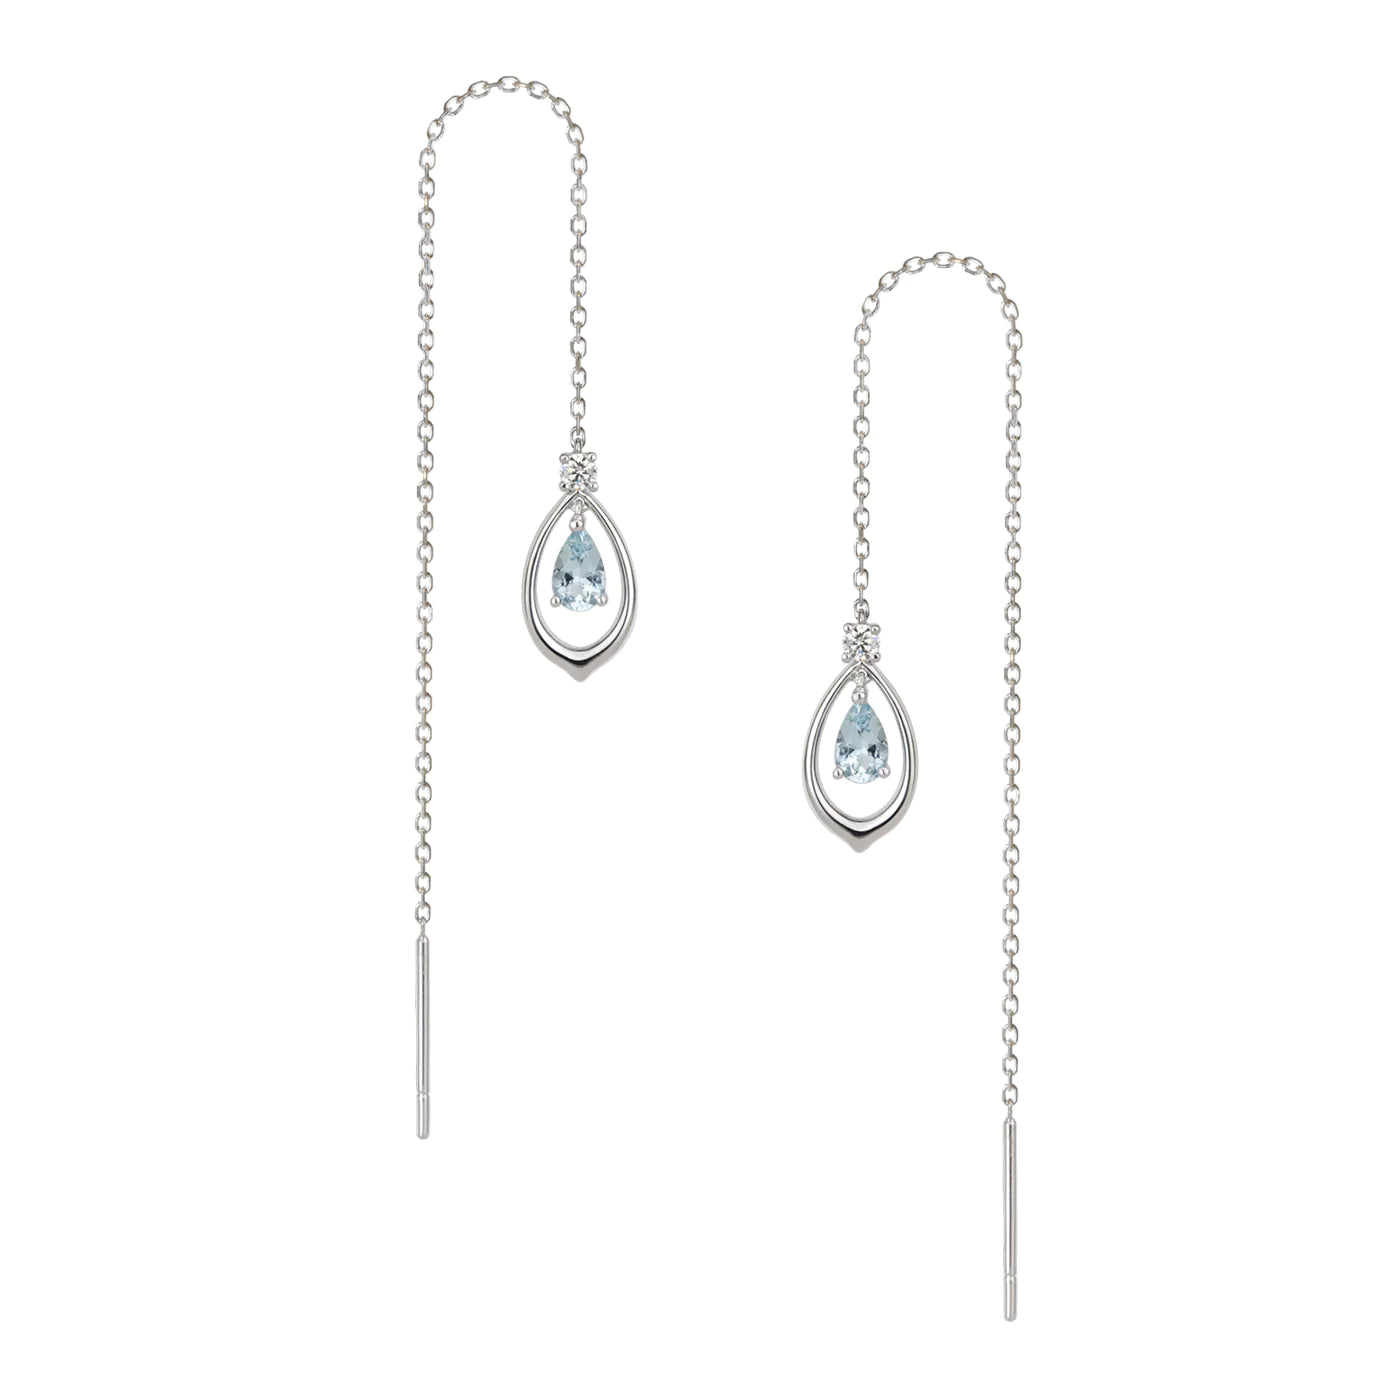 The Heavenly Phoenix Earrings 18kt White Gold with Aquamarine